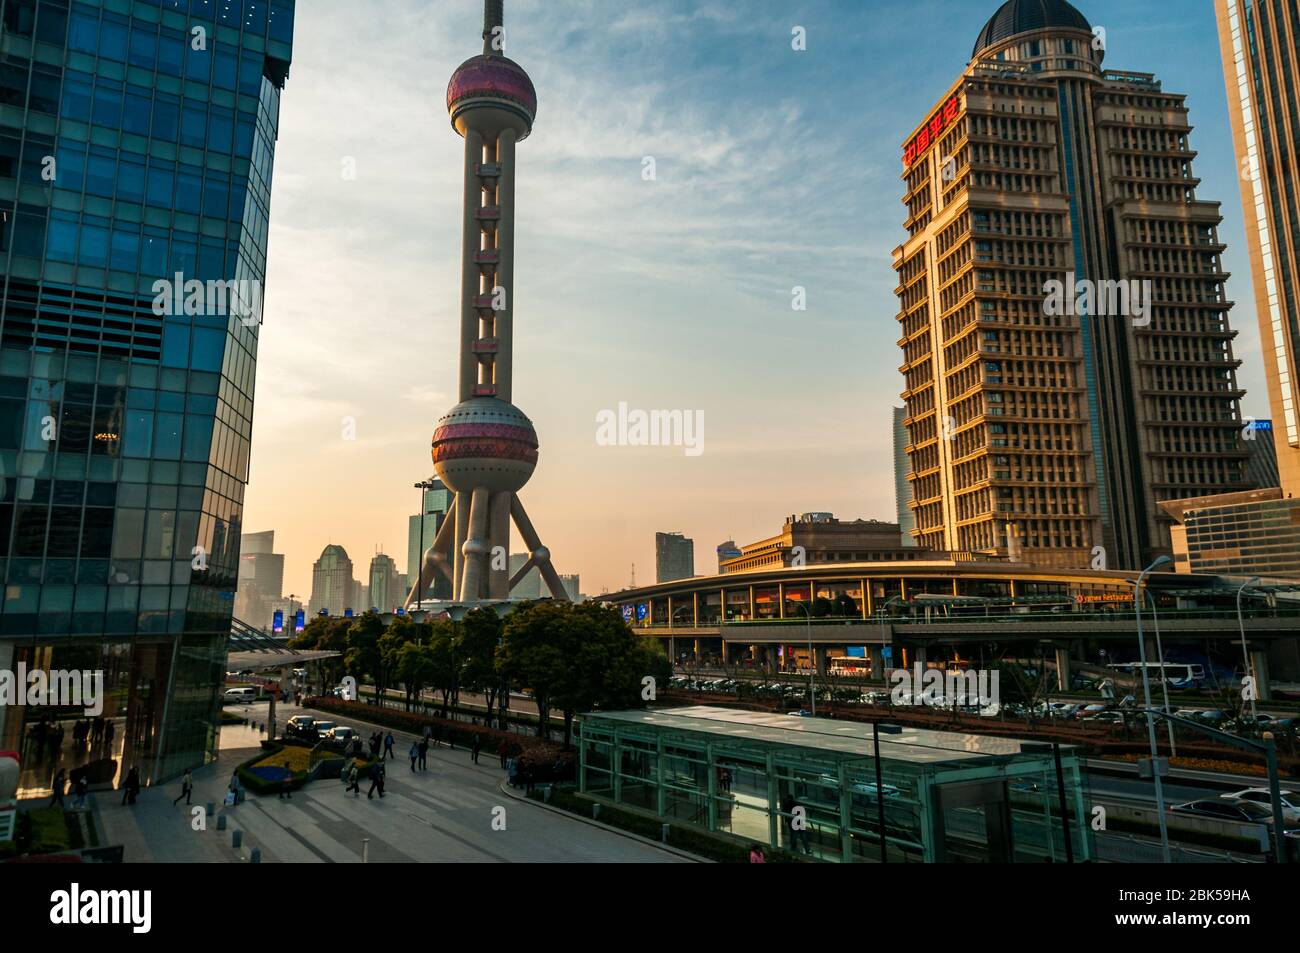 The Oriental Pearl Tower viewed against a blue sky in the Pudong New Area of Shanghai, China. Stock Photo